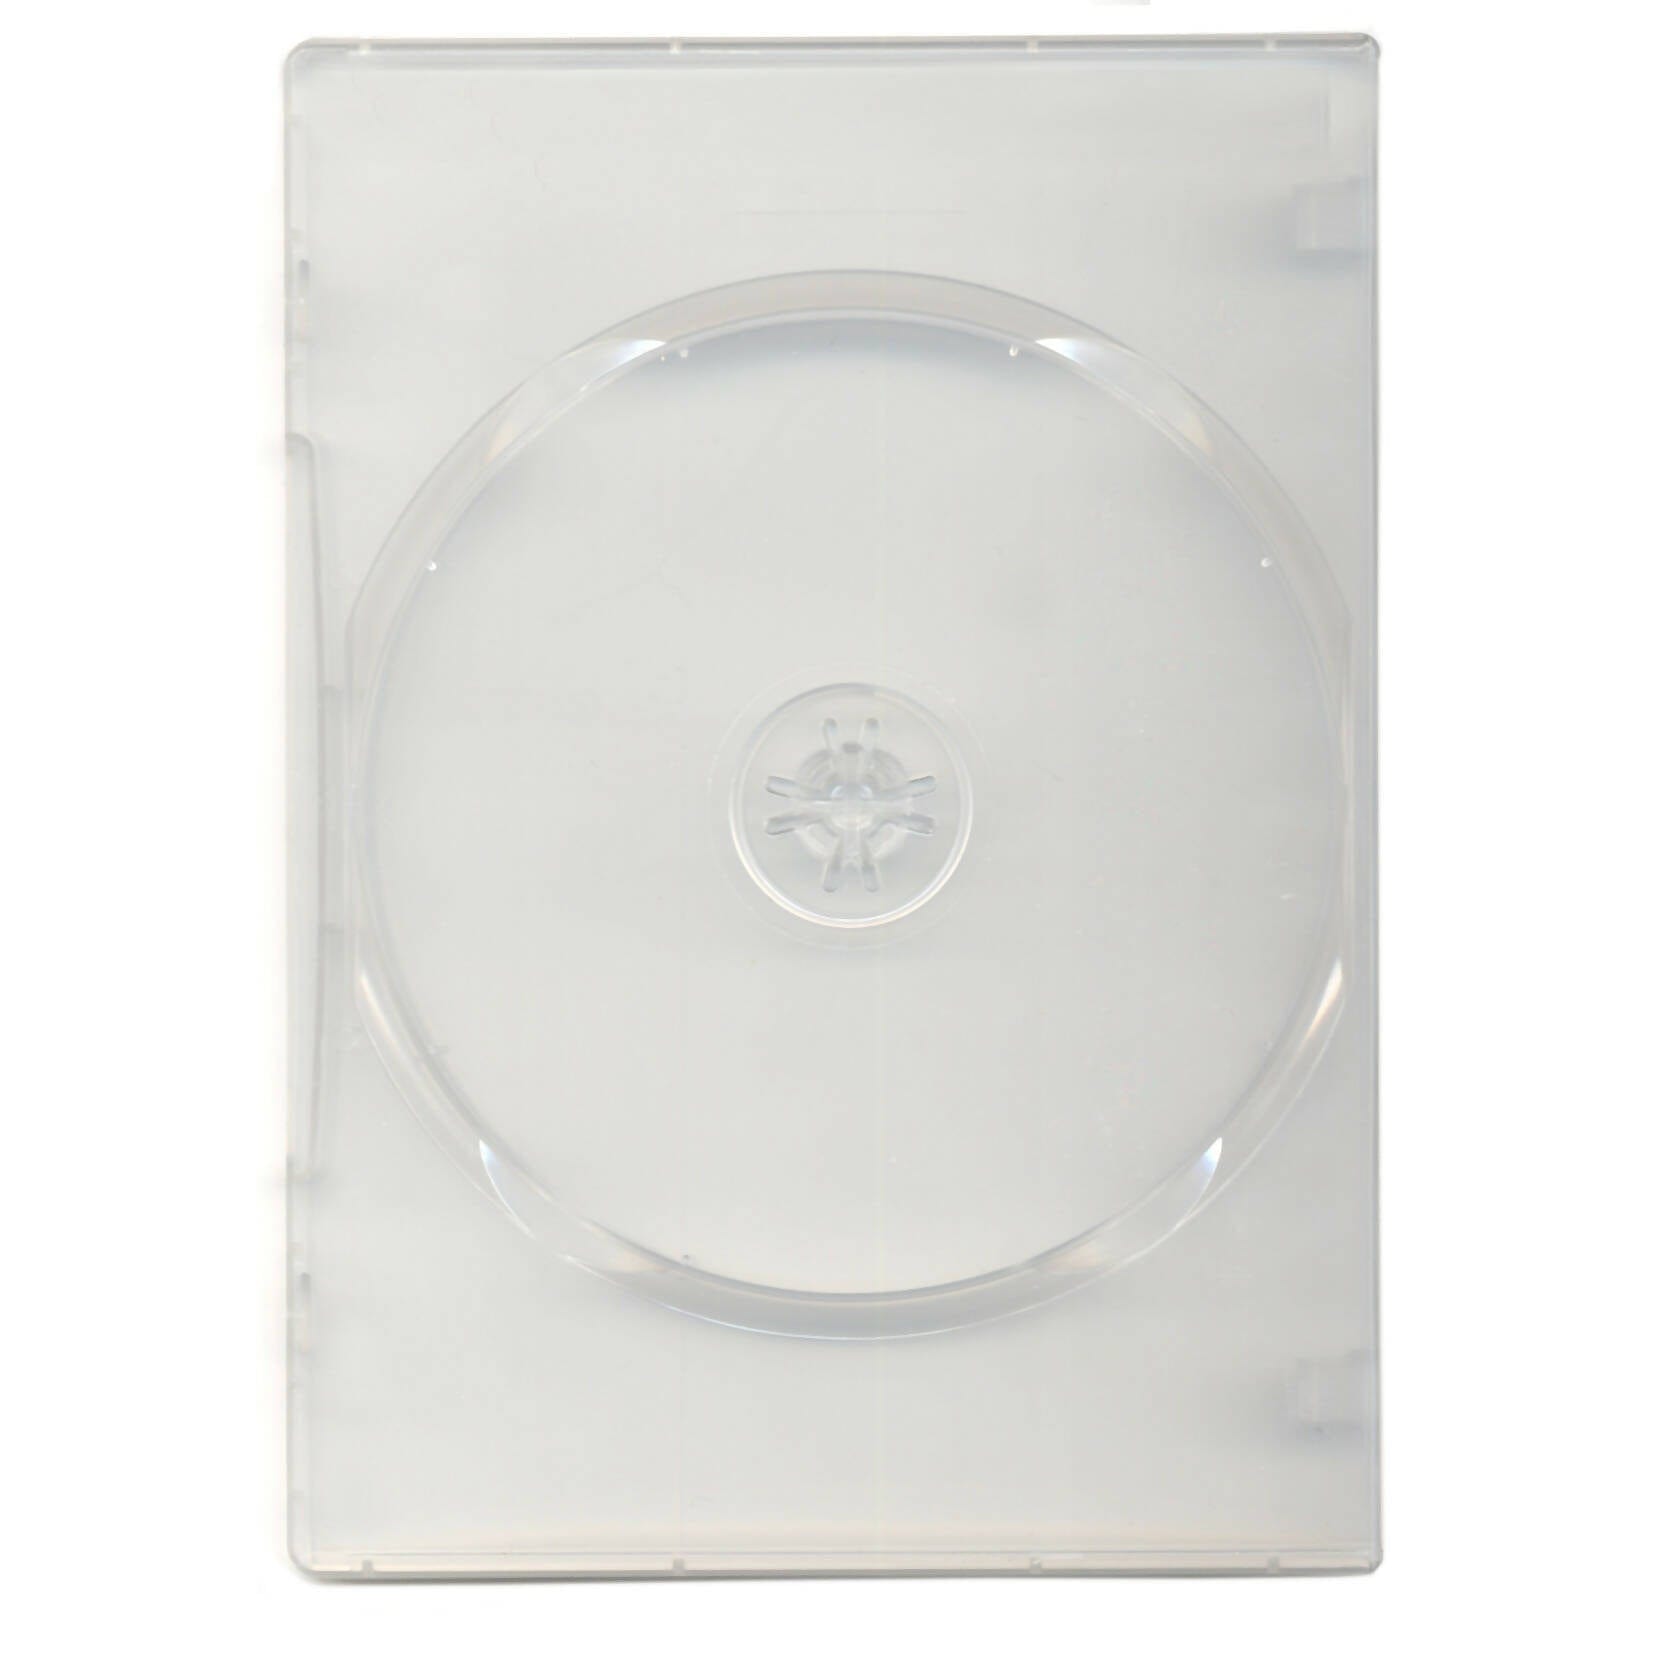 Provideolb Electronic Accessories Case DVD Single Sided 14 mm White - M82